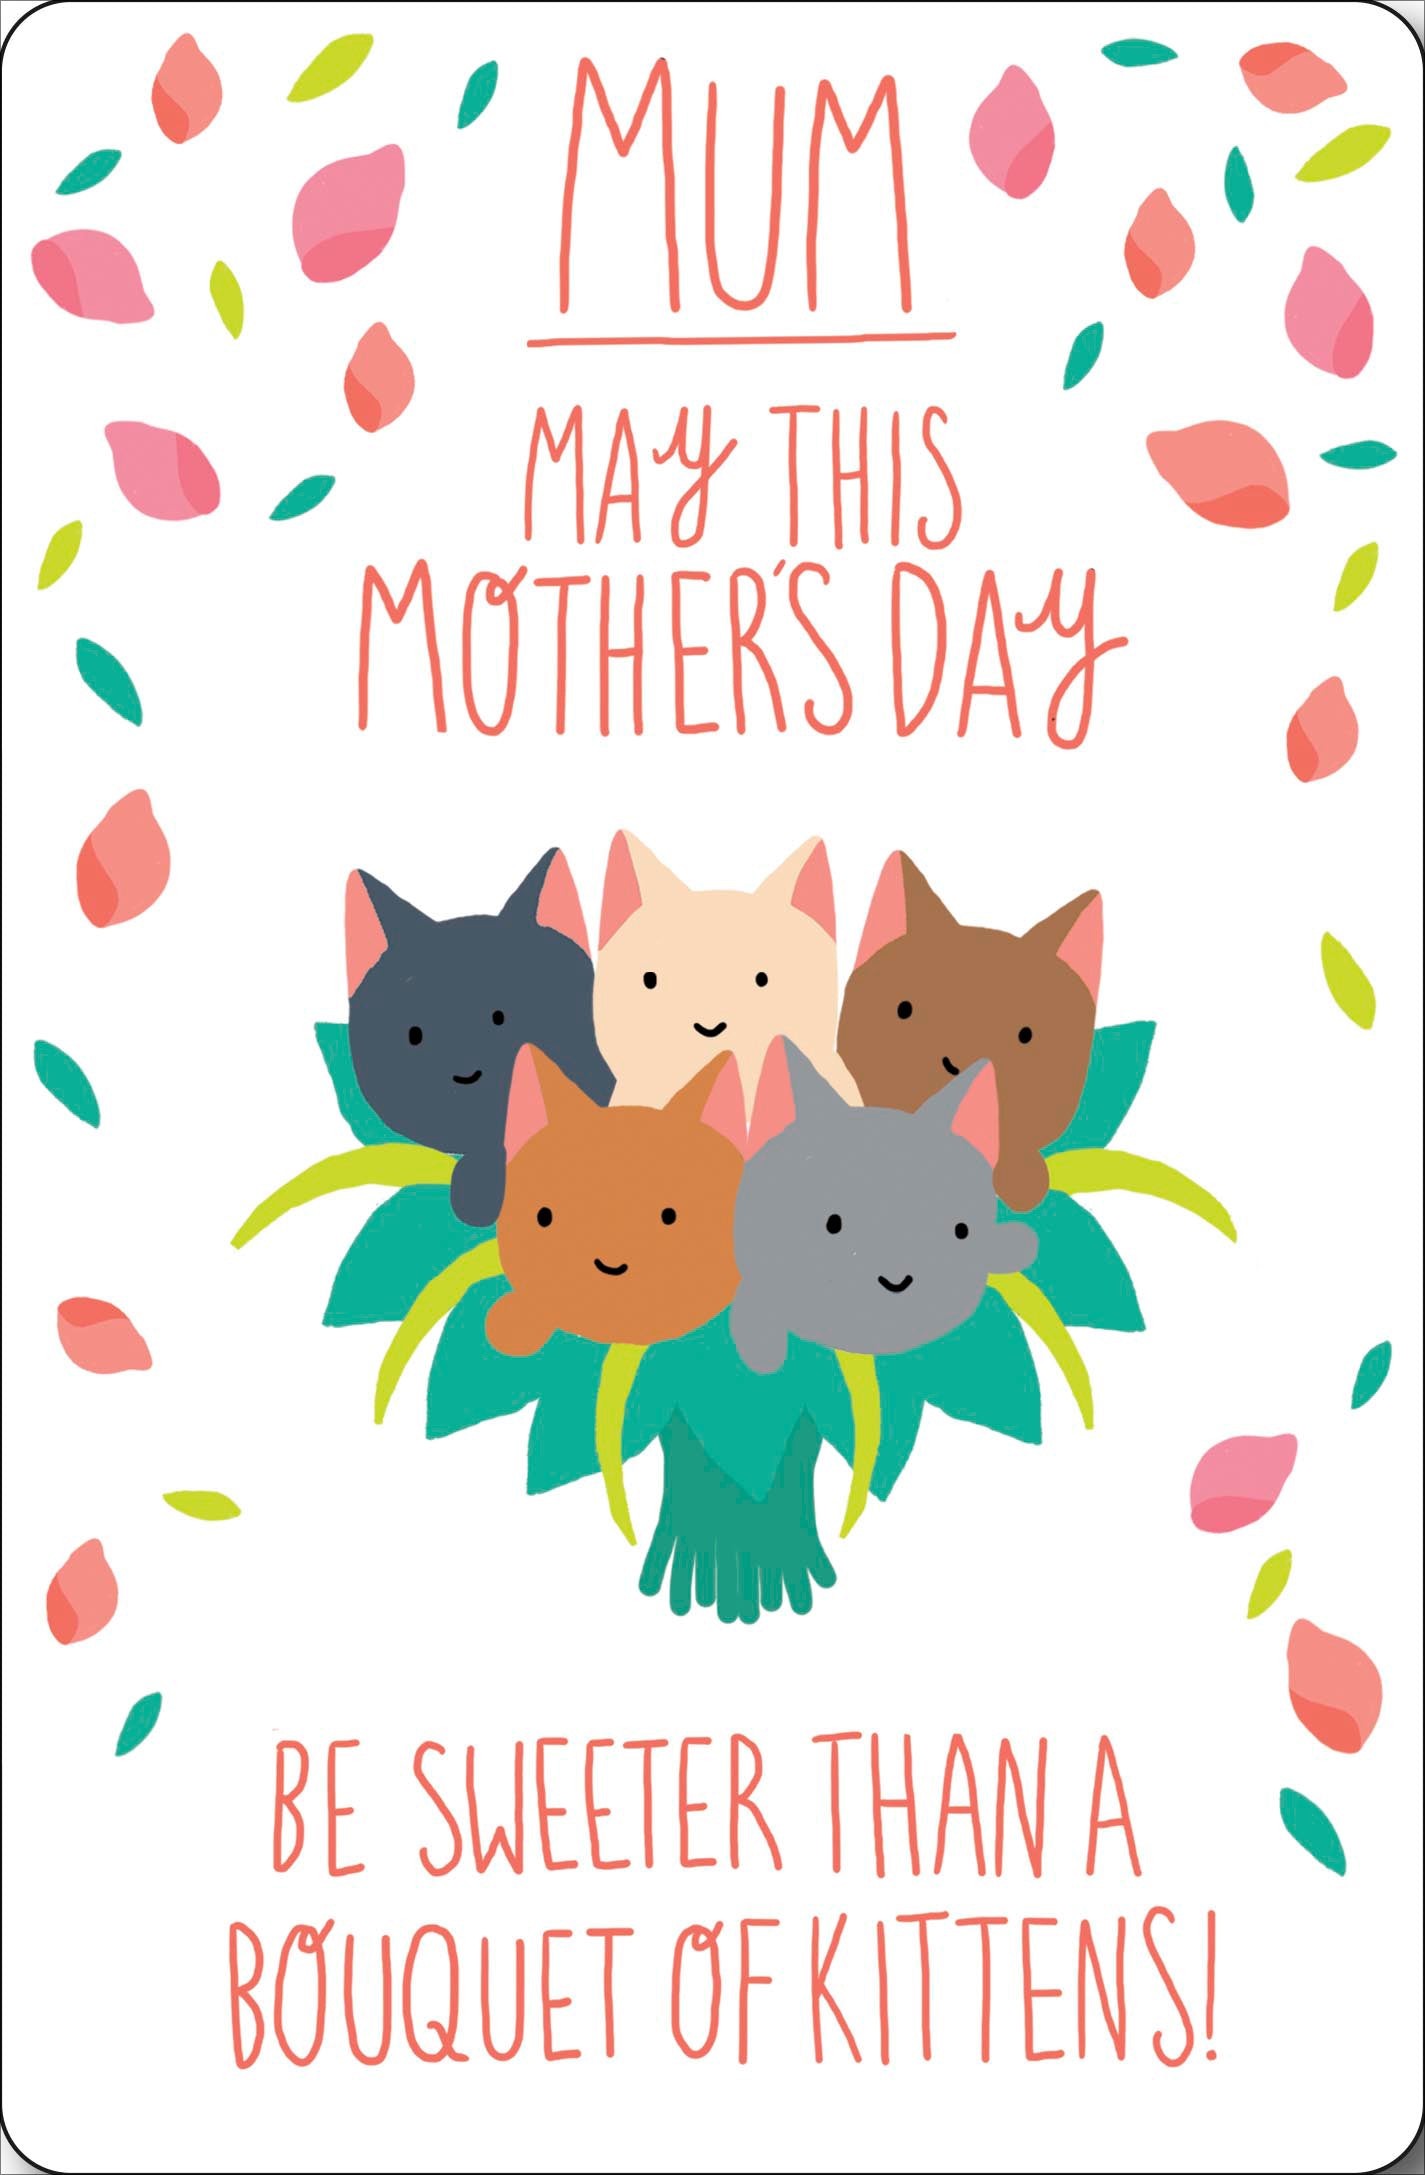 Bouquet Of Kittens Happy Mother's Day Card